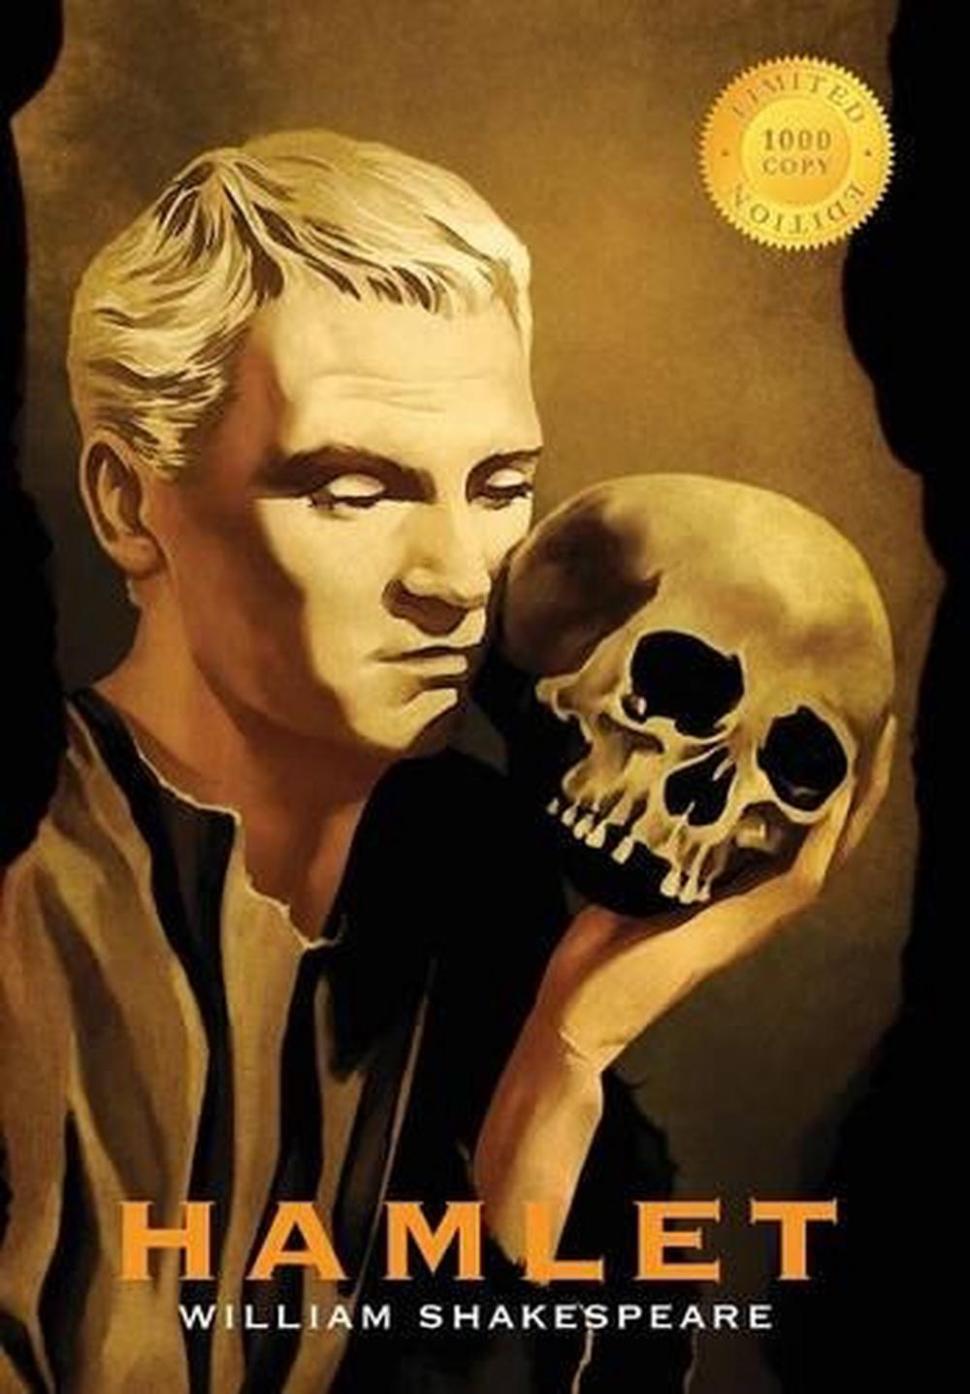 How Does Hamlet's Madness Affect His Relationships With Others?